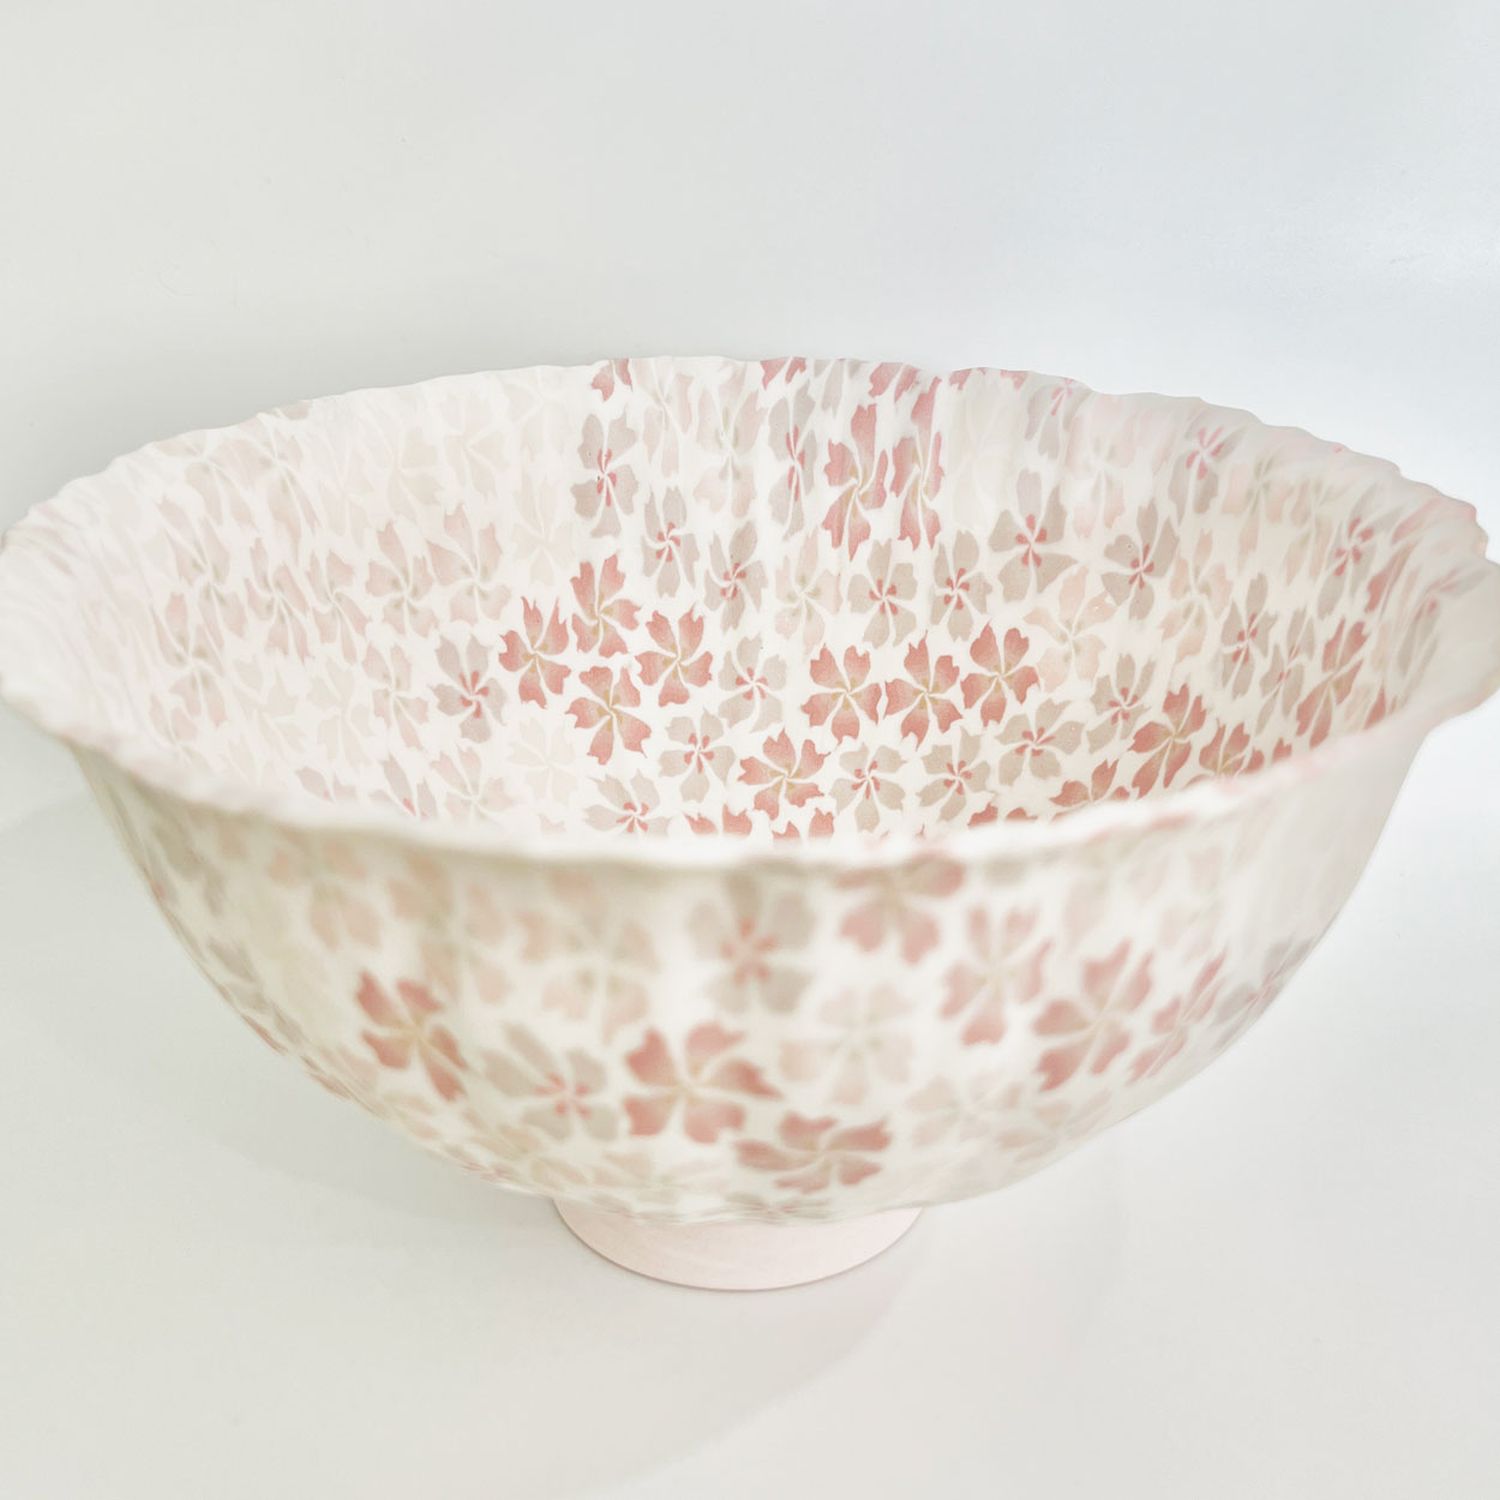 Eiko Maeda: Pink and Purple Floral Bowl Product Image 1 of 2